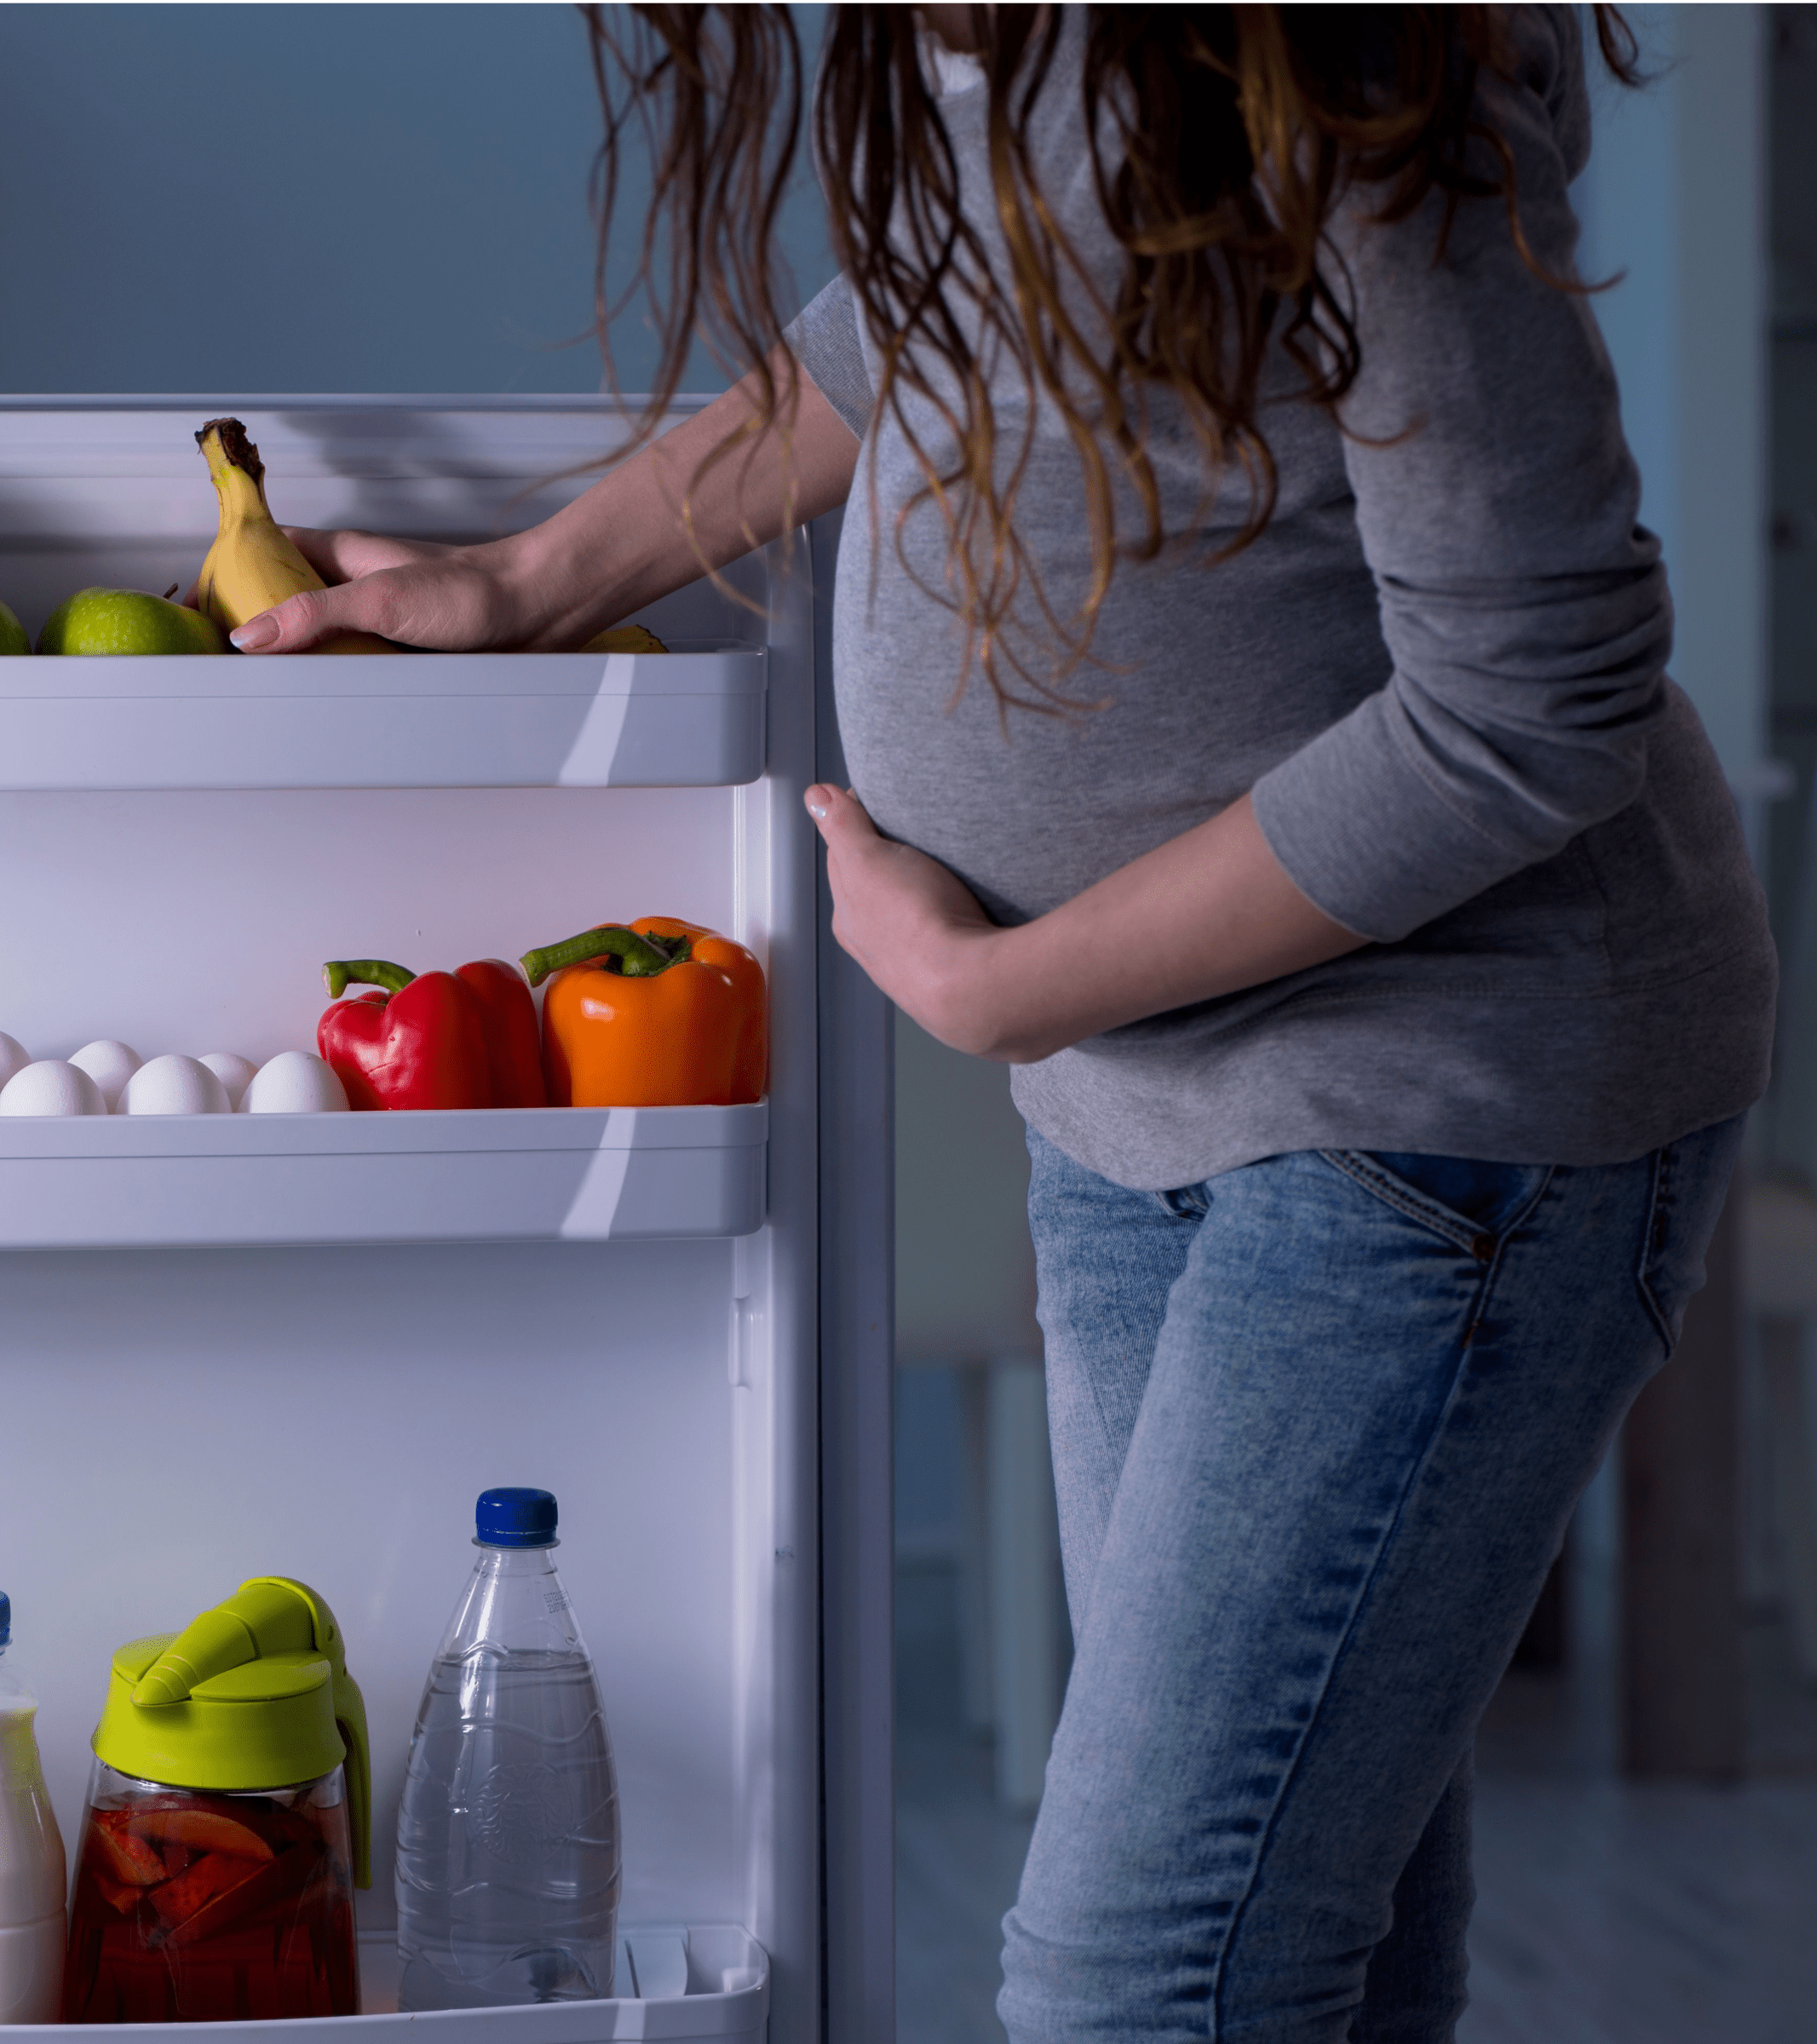 Pregnant woman looking for healthy food inside the refrigerator